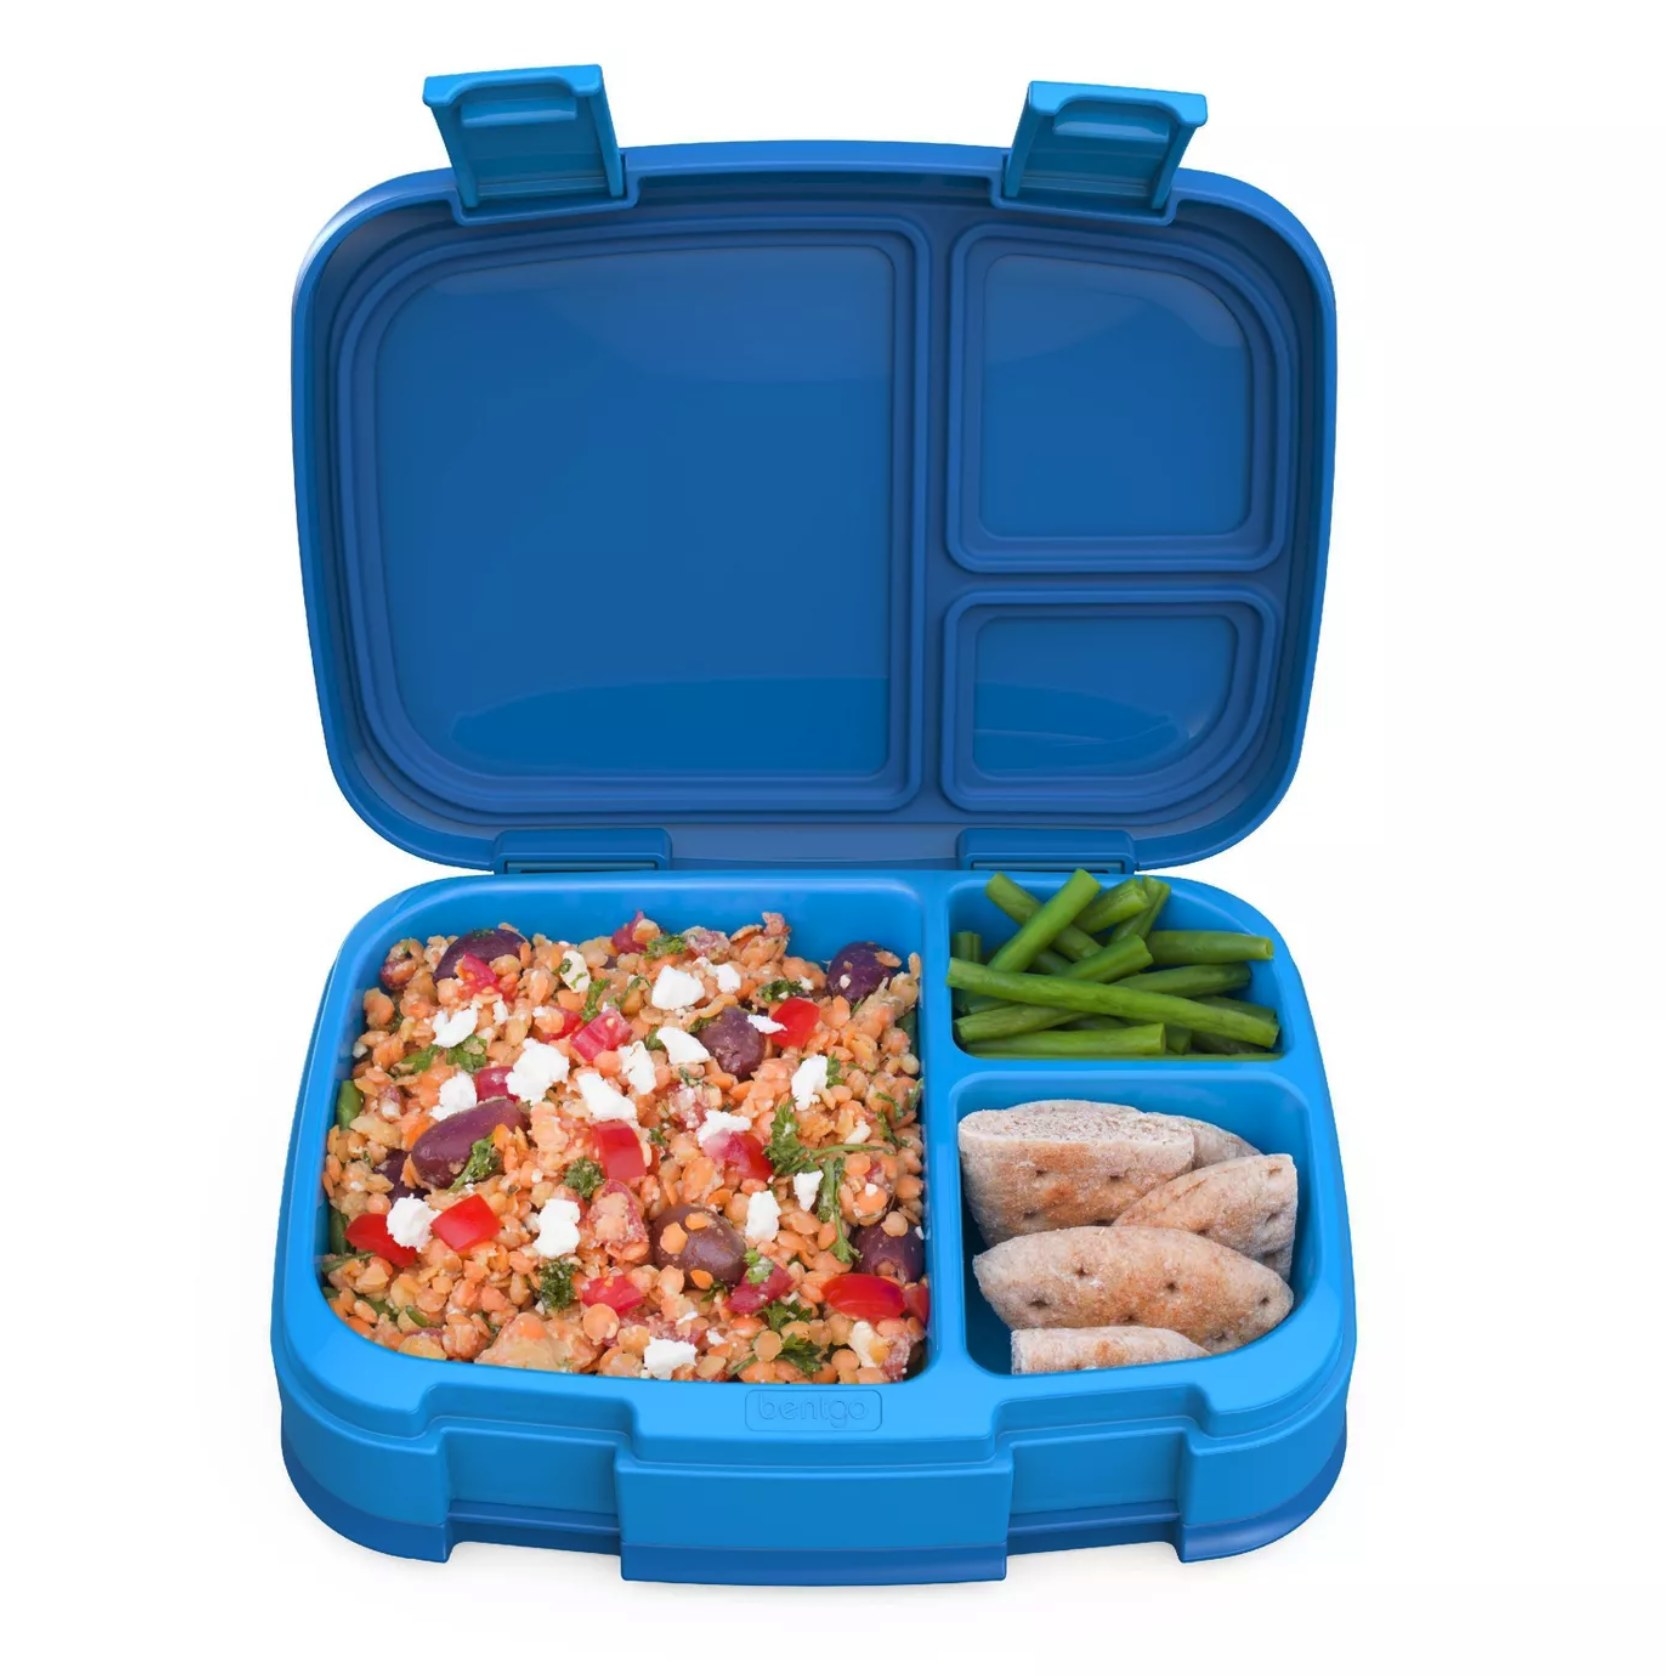 A blue lunchbox with three compartments holding a lentil salad, pita bread, and green beans.